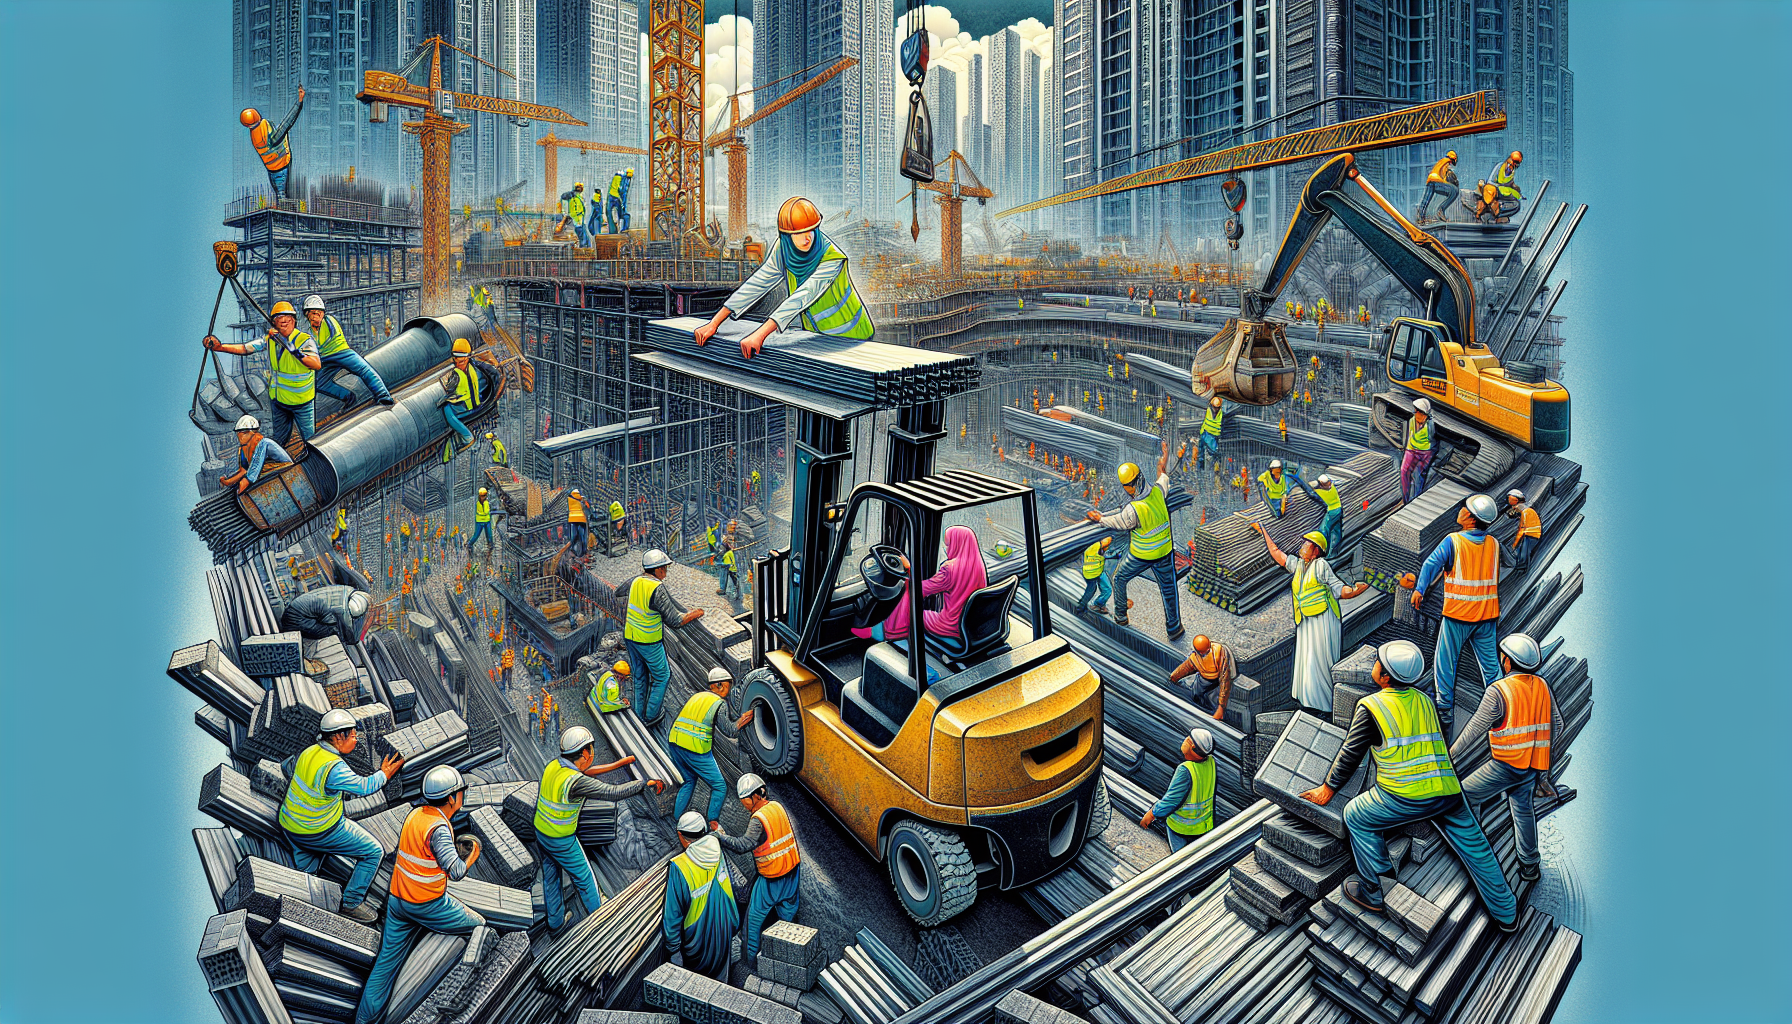 Illustration of workers navigating through a busy construction site